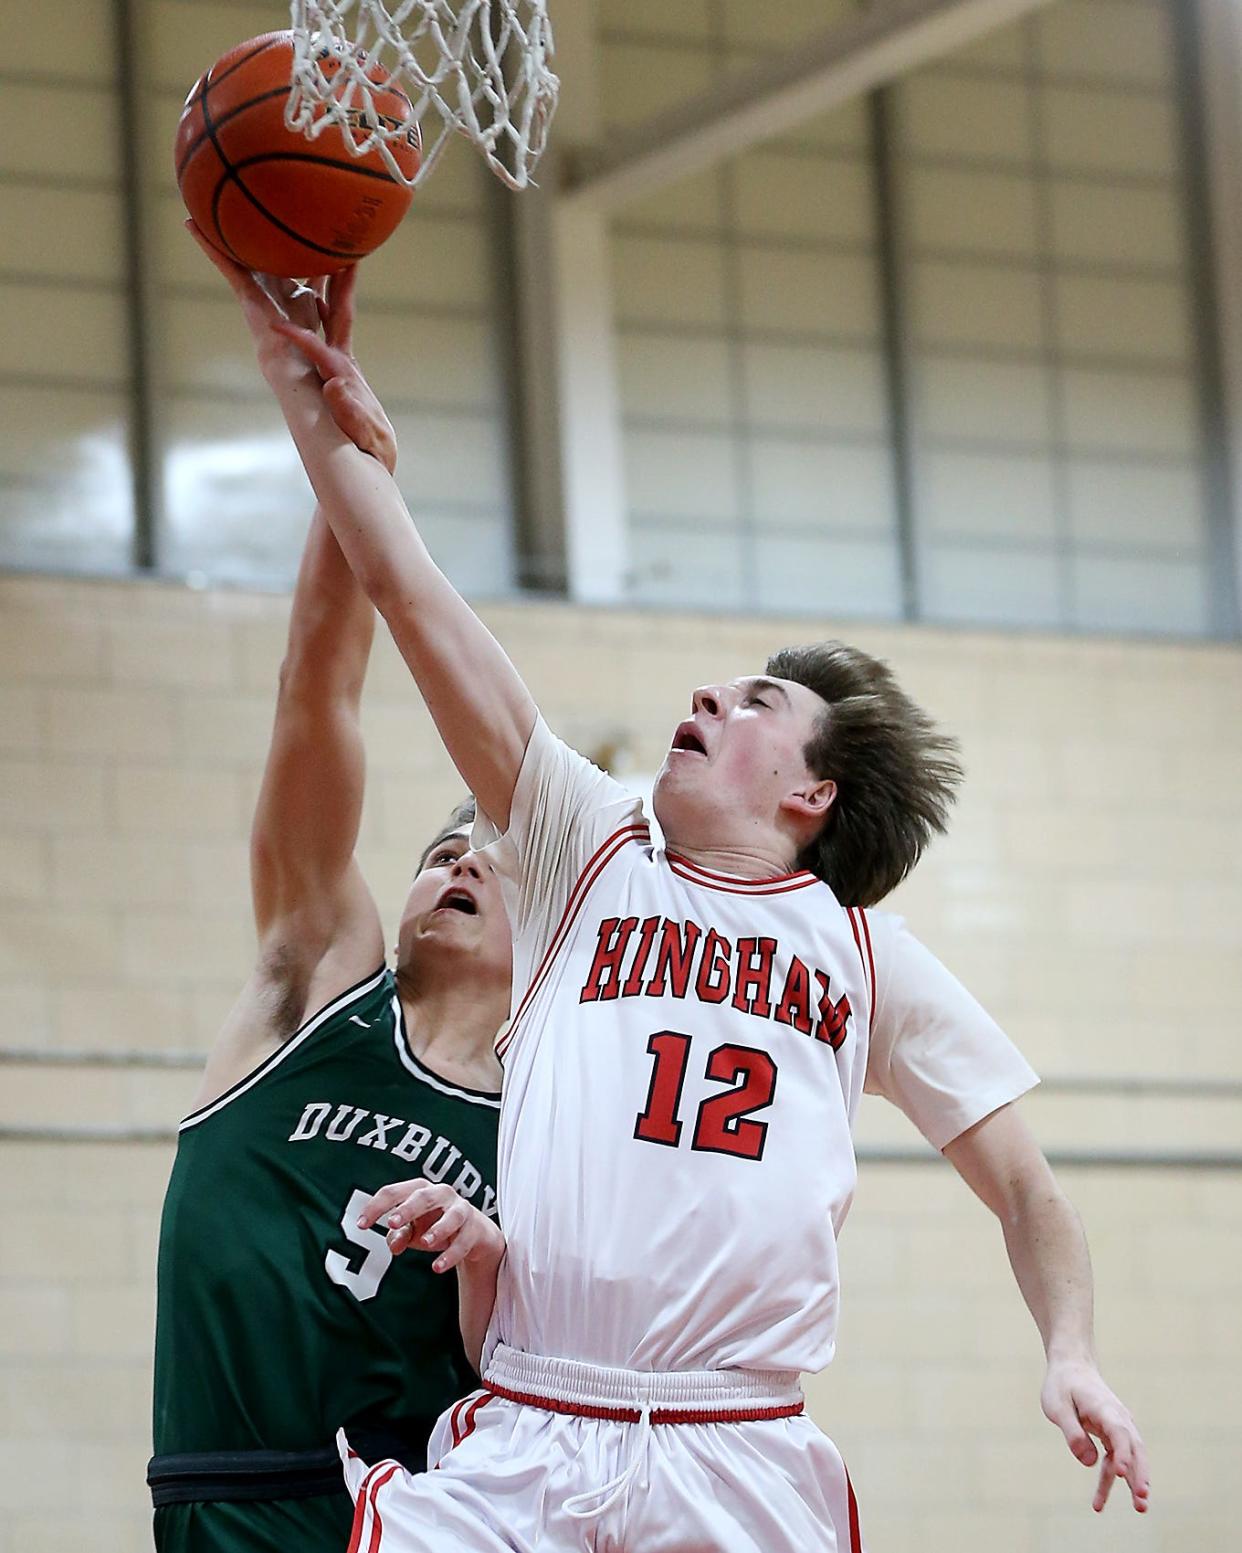 Hingham's Chase Mello earns a trip to the line after a foul by Duxbury's Carl Sundstrom on a fast break opportunity during third quarter action of their game against Duxbury at Hingham High on Friday, Feb. 10, 2023. 